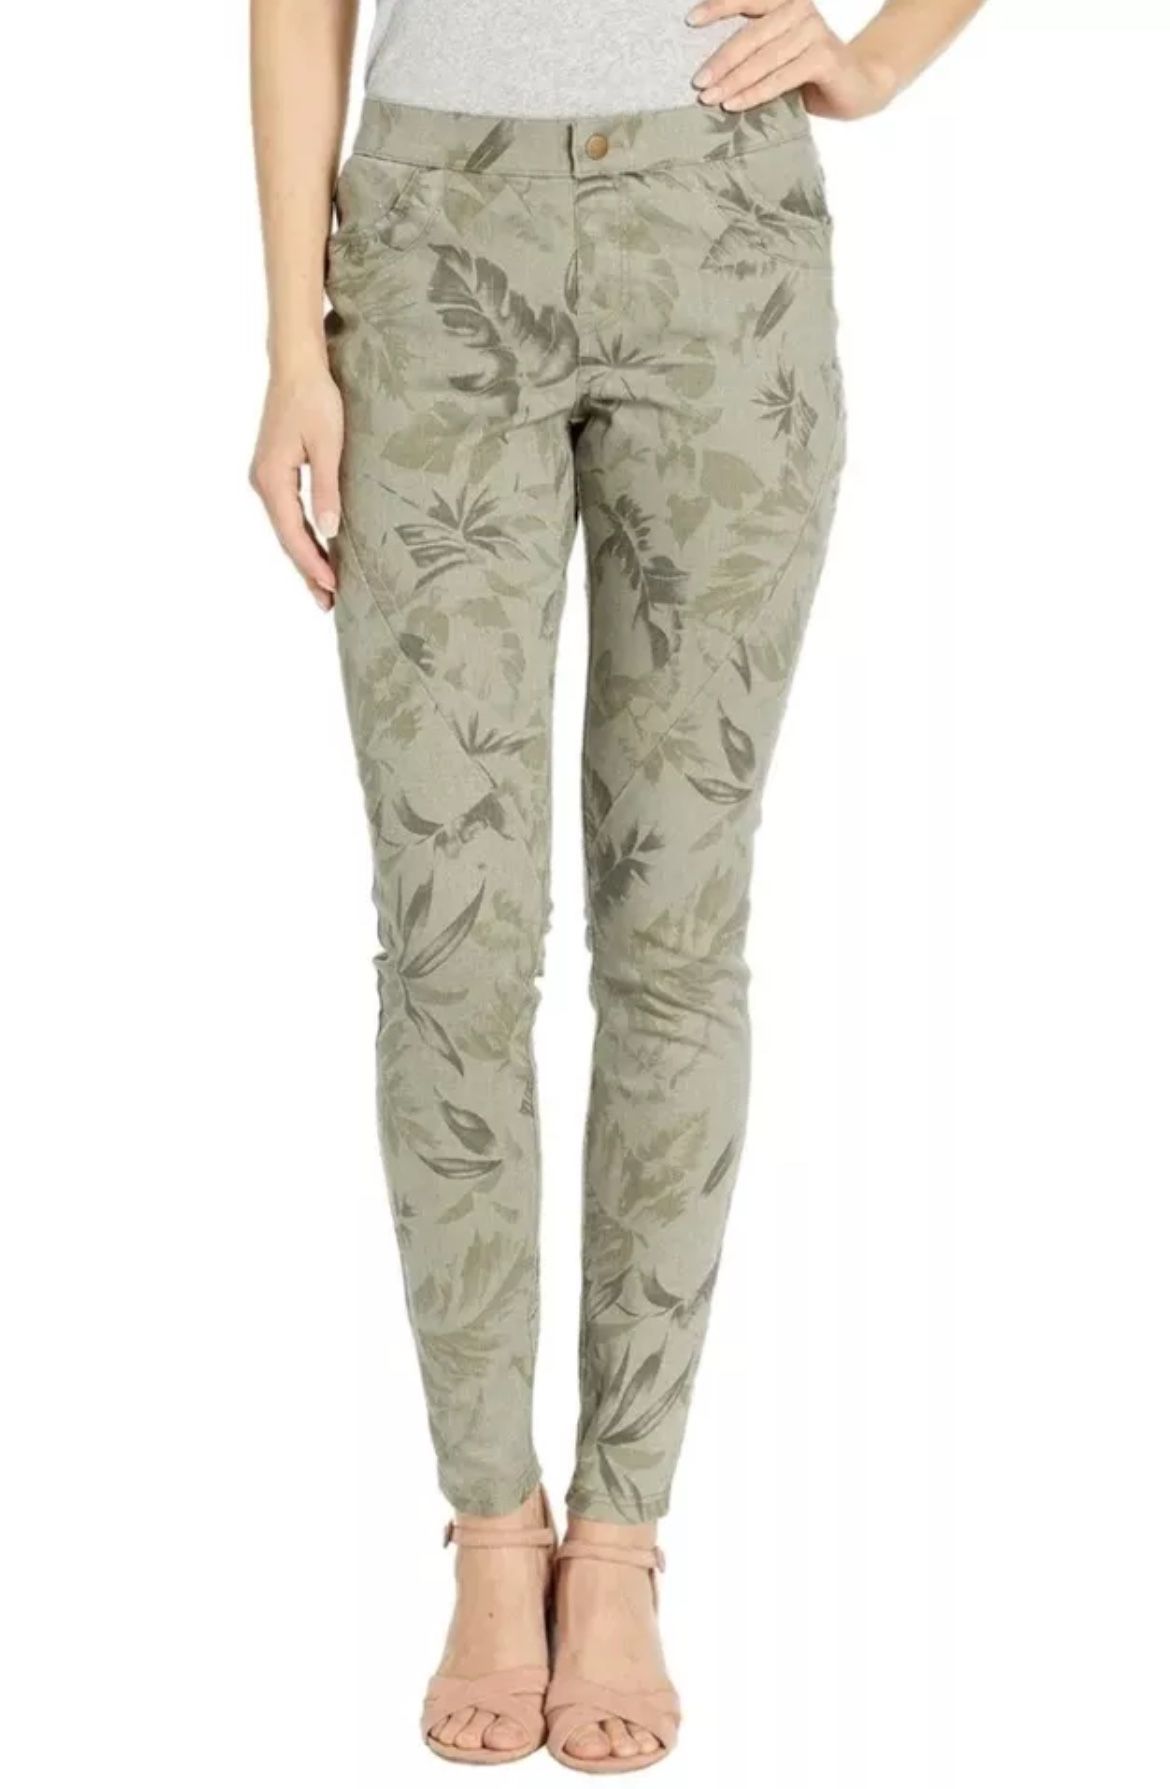 HUE Seagrass Fatique Twill Pull On Leggings M nwot green   HUE Seagrass Fatique Twill Pull On Leggings M. New Without Tags Hue Fatigue washed twill le